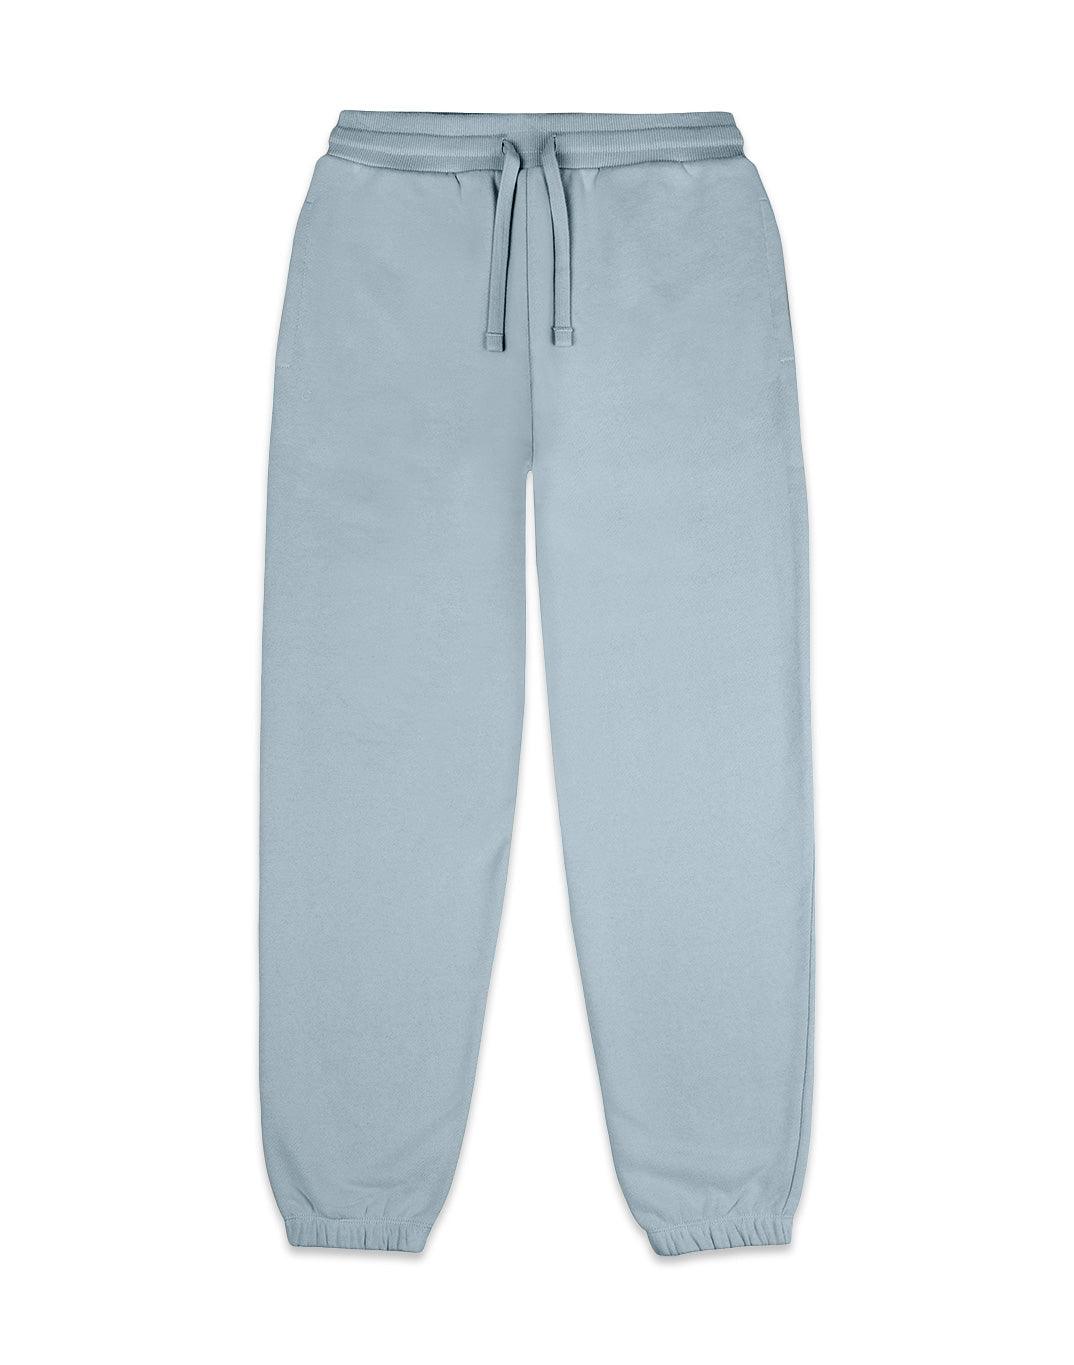 The Jogger in Chalk Blue - Joggers - Gym+Coffee IE